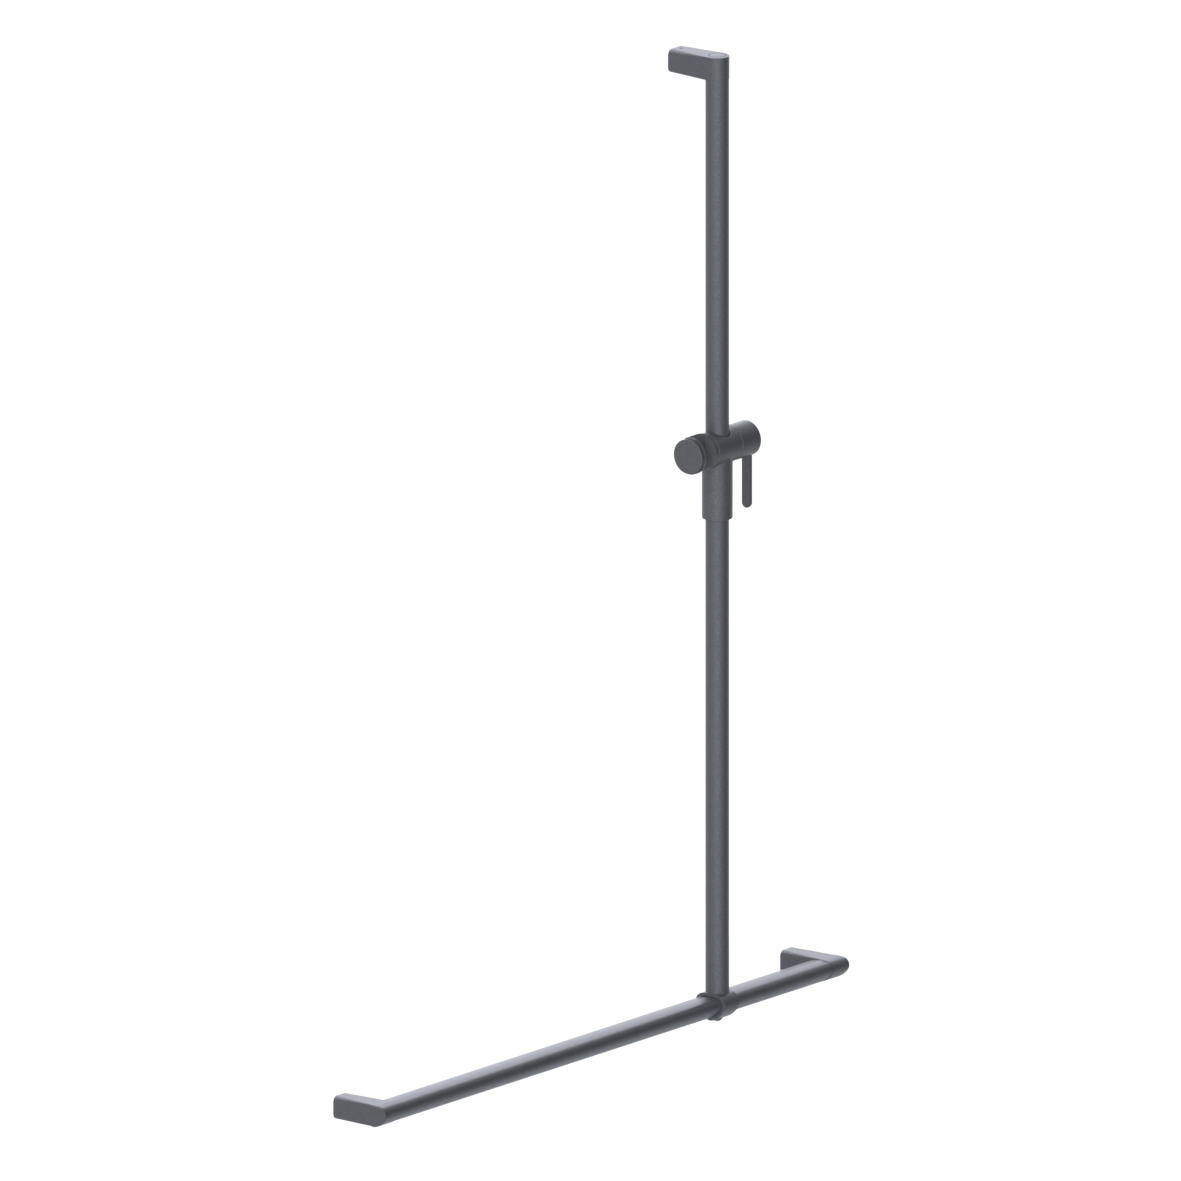 Cavere Care Shower handrail, with movable shower handrail, left and right, 900 x 1200 mm, single-point mounting, Cavere Metallic anthracite